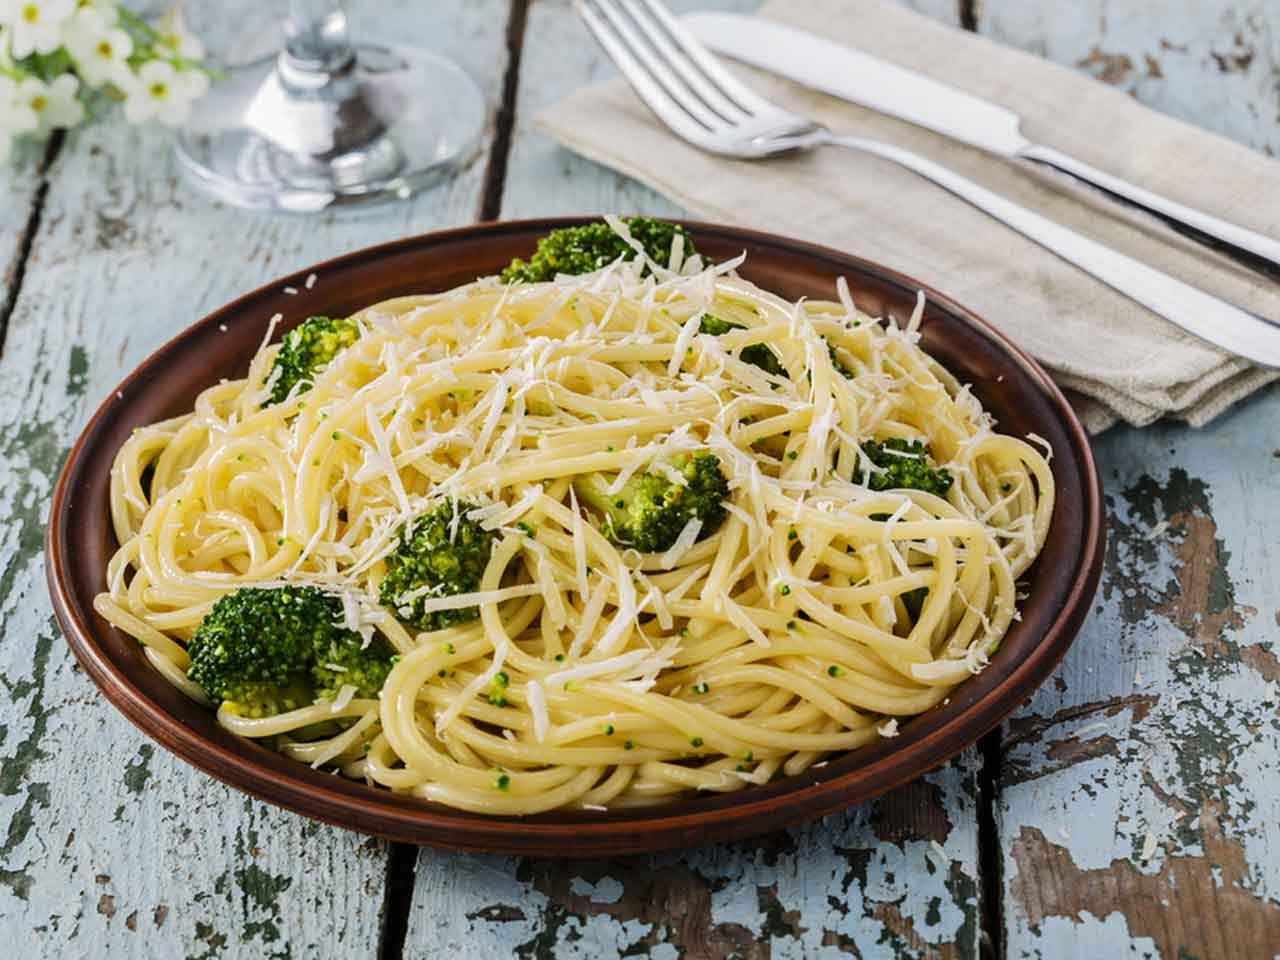 Spaghetti with broccoli and anchovies